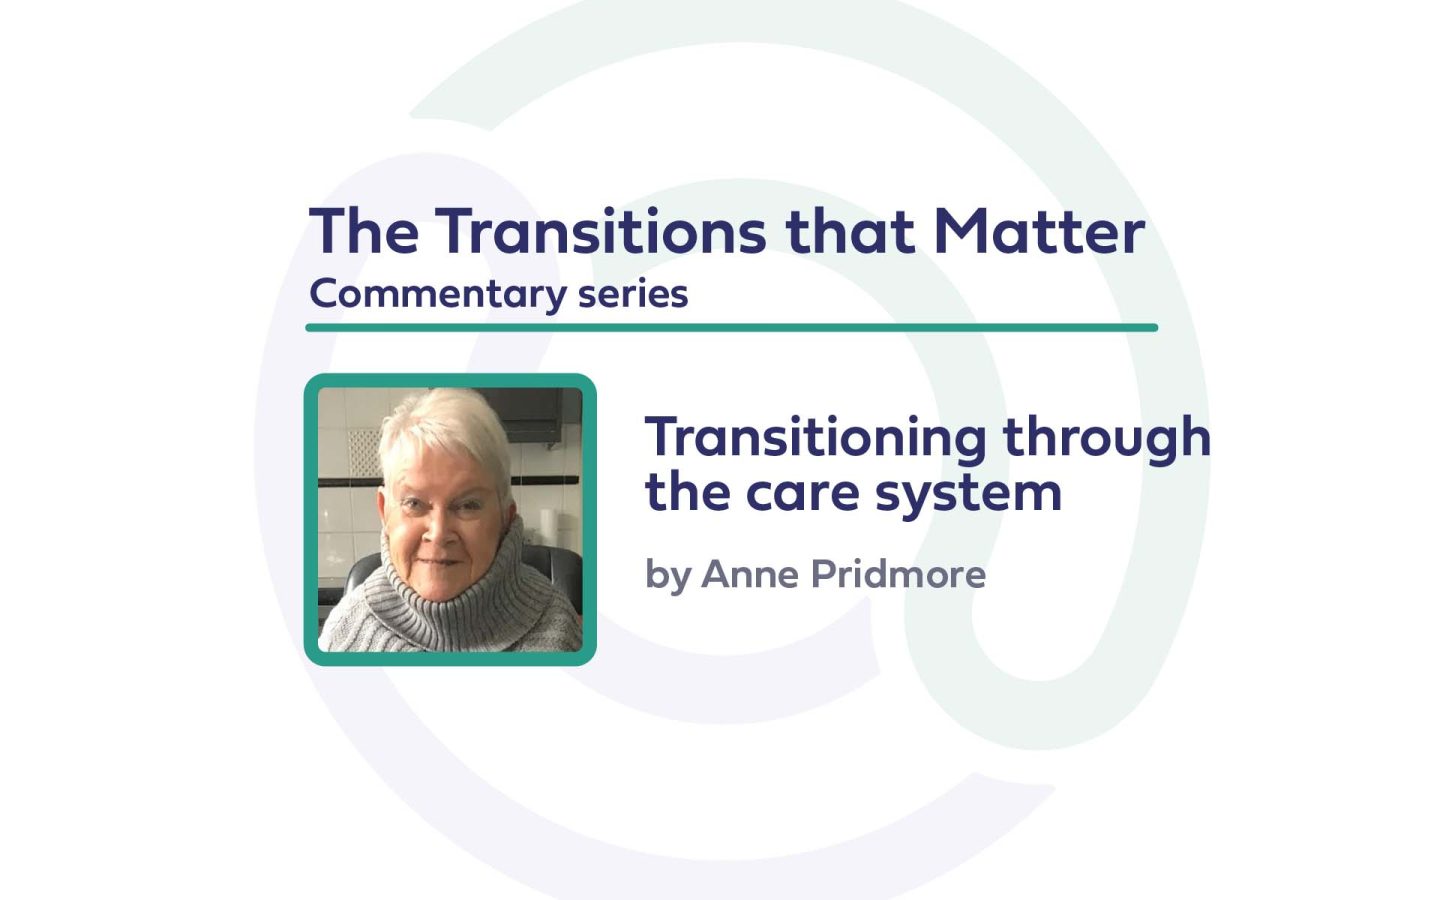 Anne Pridmore profile picture with text: "The transitions that matter Commentary series, 'Transitioning through the care system', by Anne Pridmore"